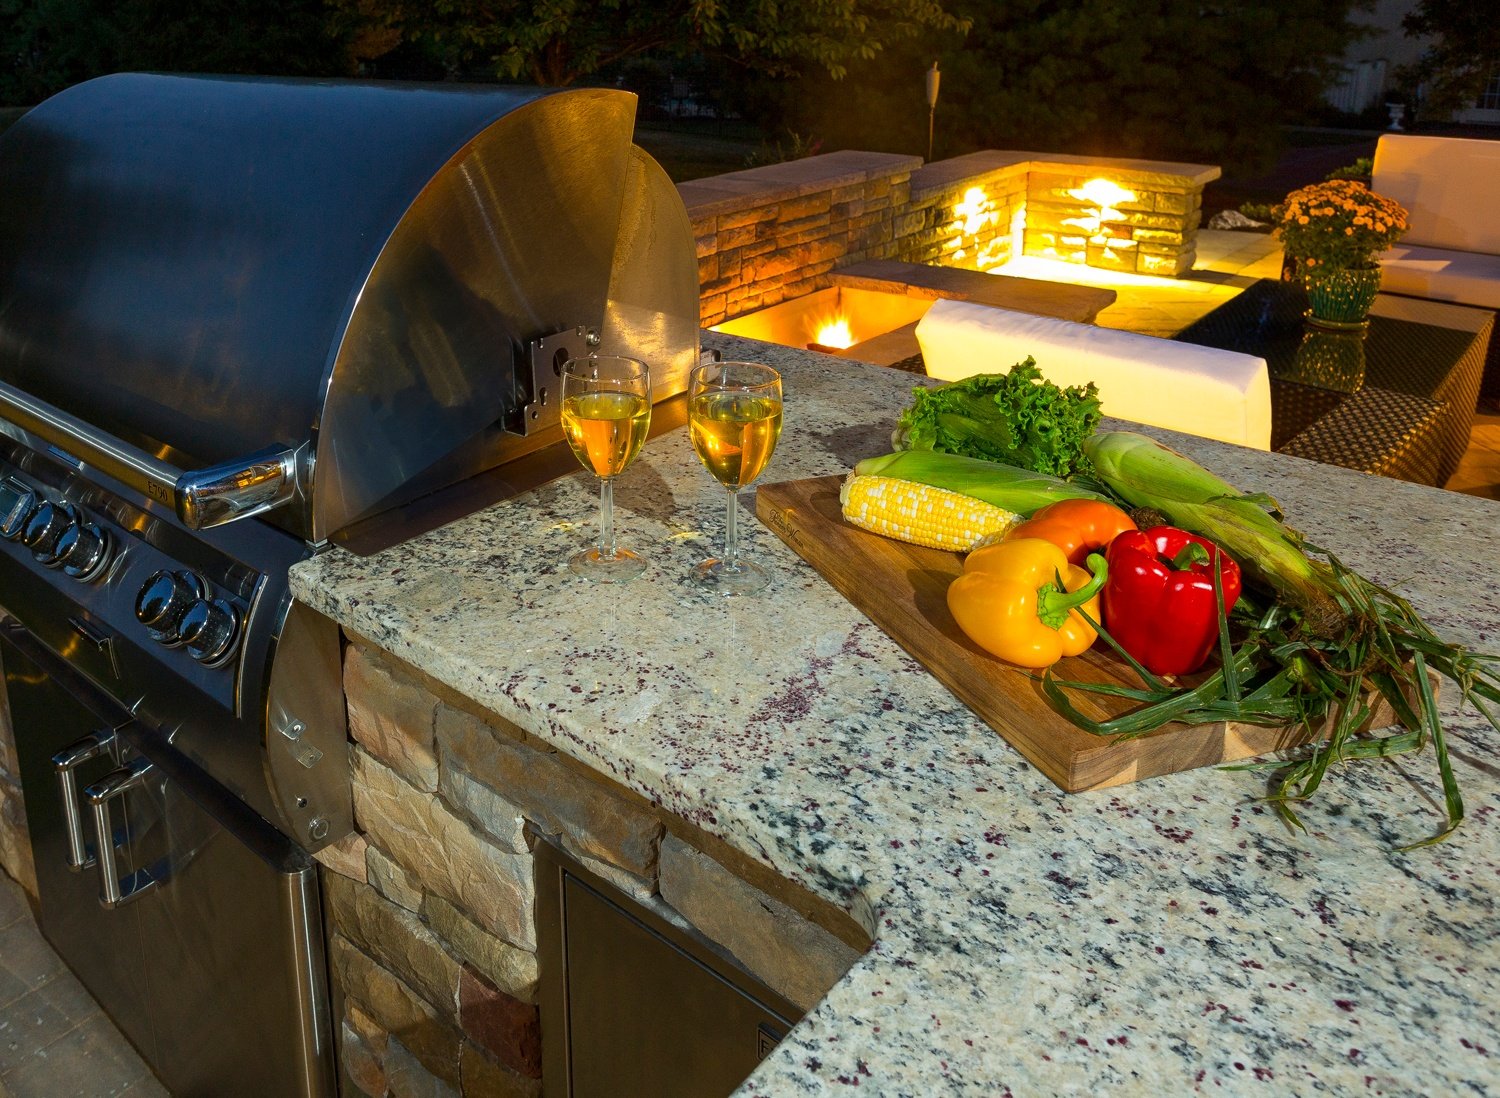 The 10 Hottest Outdoor Kitchen Design Ideas for Your Dream Backyard